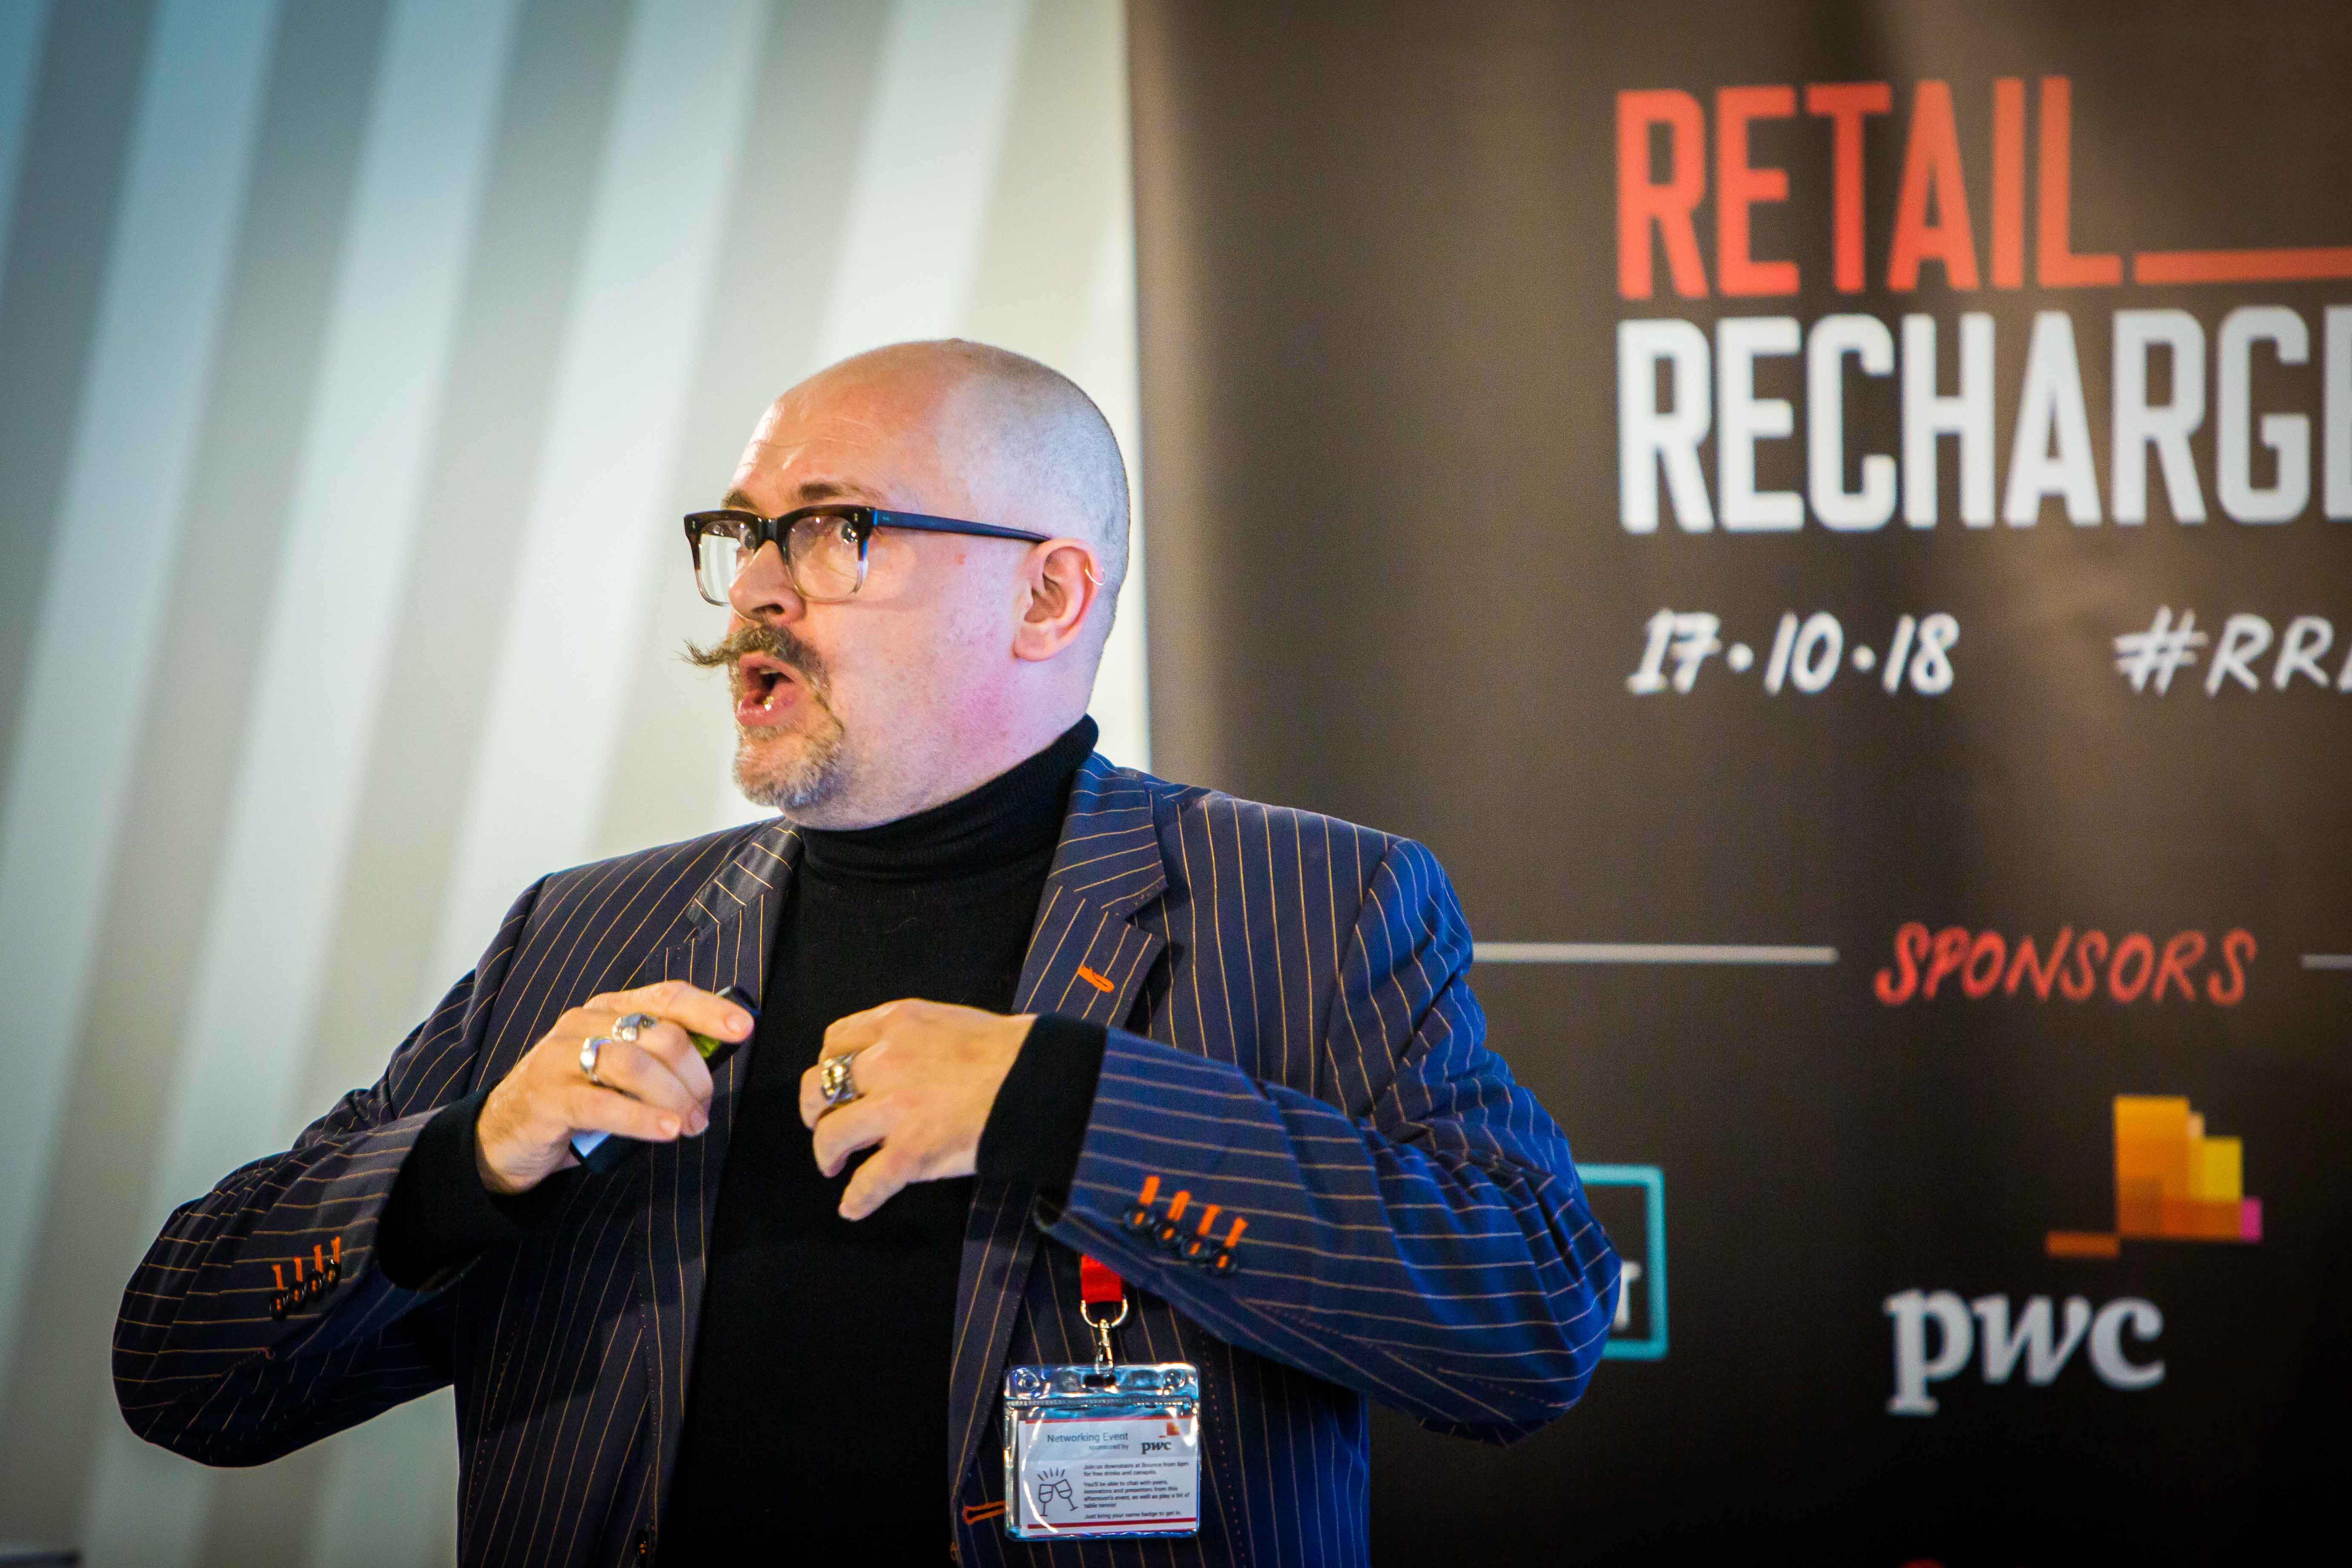 Finalist at Retail Recharged 2018.